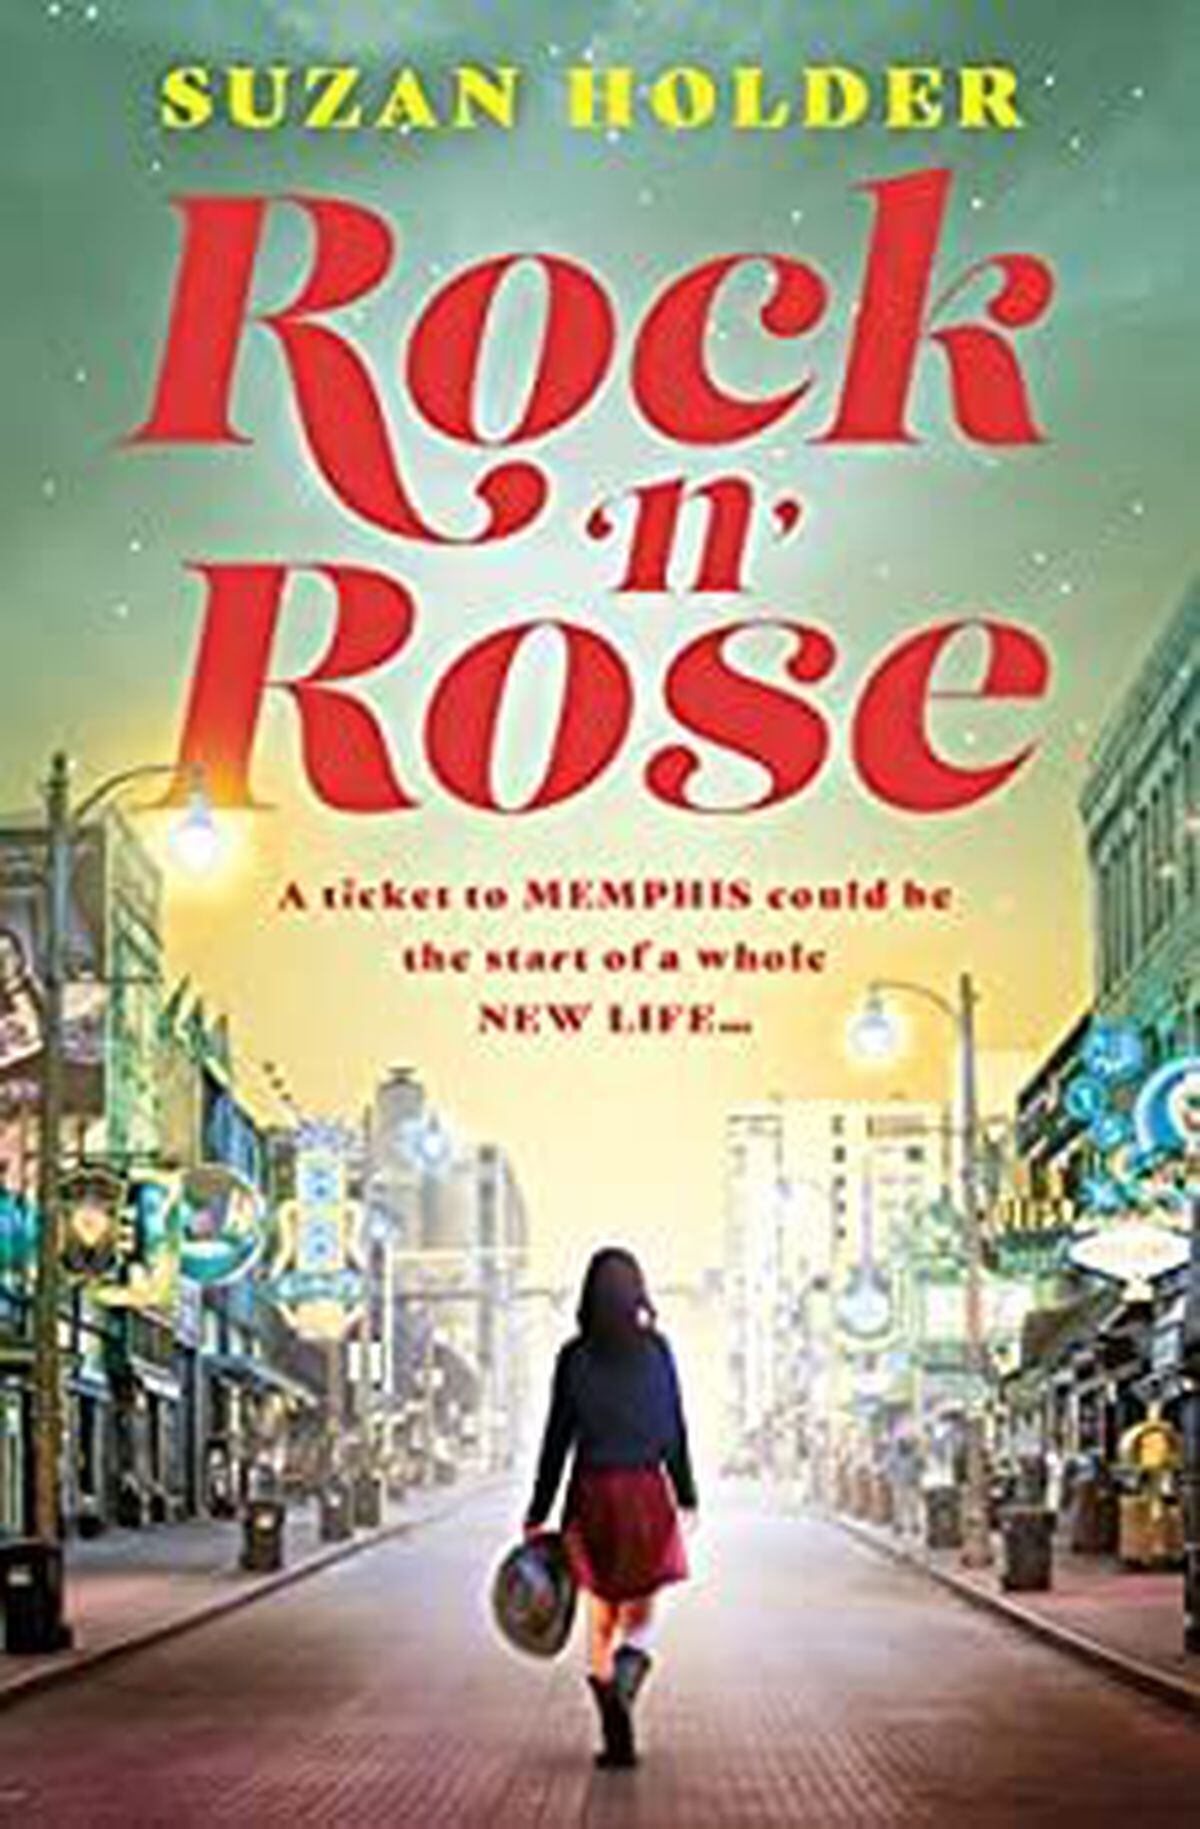 Suzan's book Rock and Rose